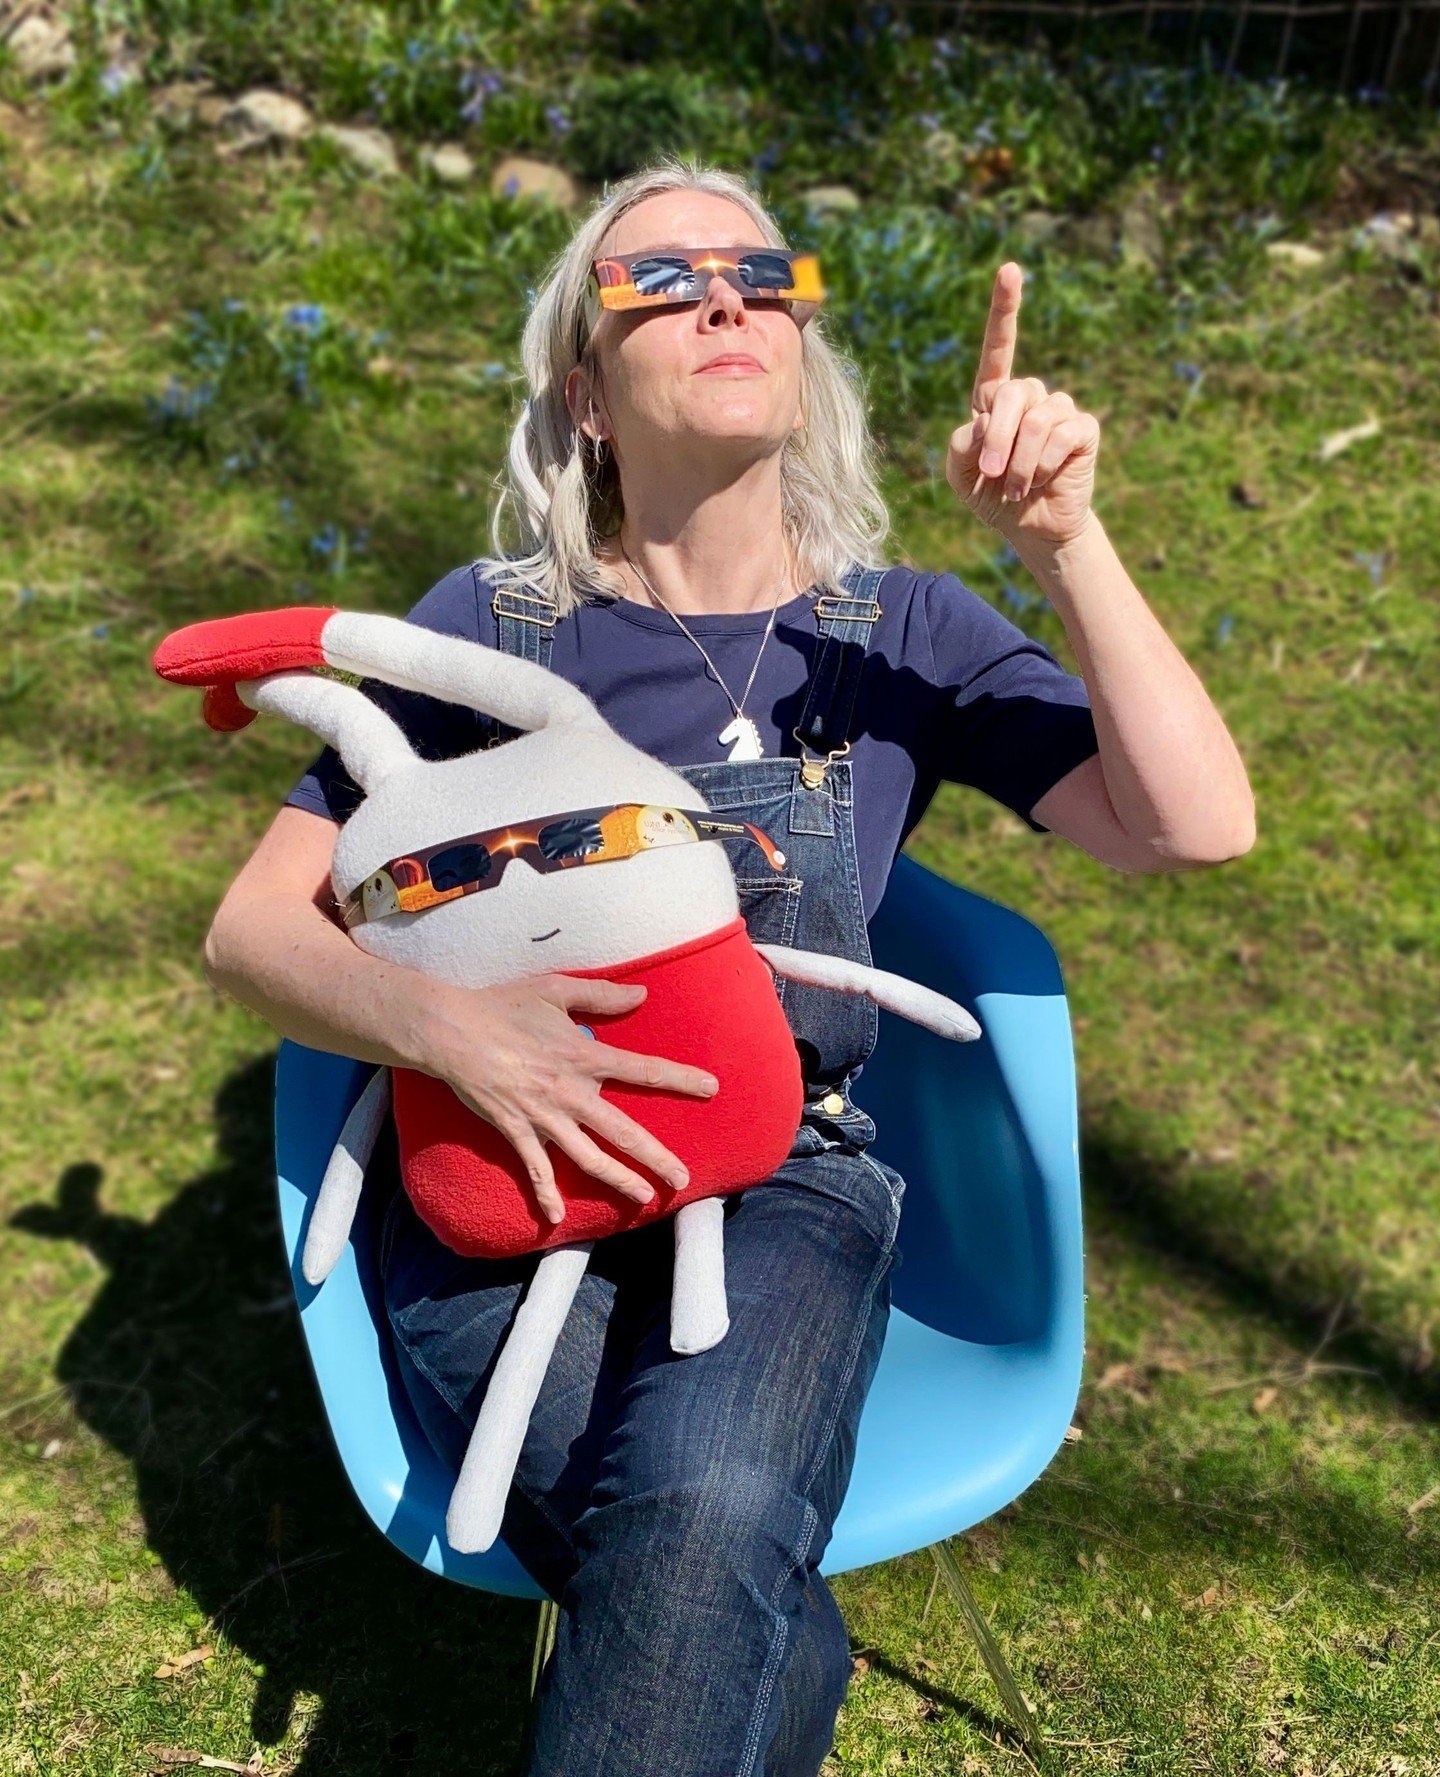 Big LuMi and I are ready! Are you?? 😎 🌞⁠
⁠
Where we live, the sun will be obscured by ✨️93%✨️!⁠
Cancel your meetings and get set up outside if you can.⁠
It's not just the light that changes, but the temperature drops, the birds quiet, etc.⁠ A true 